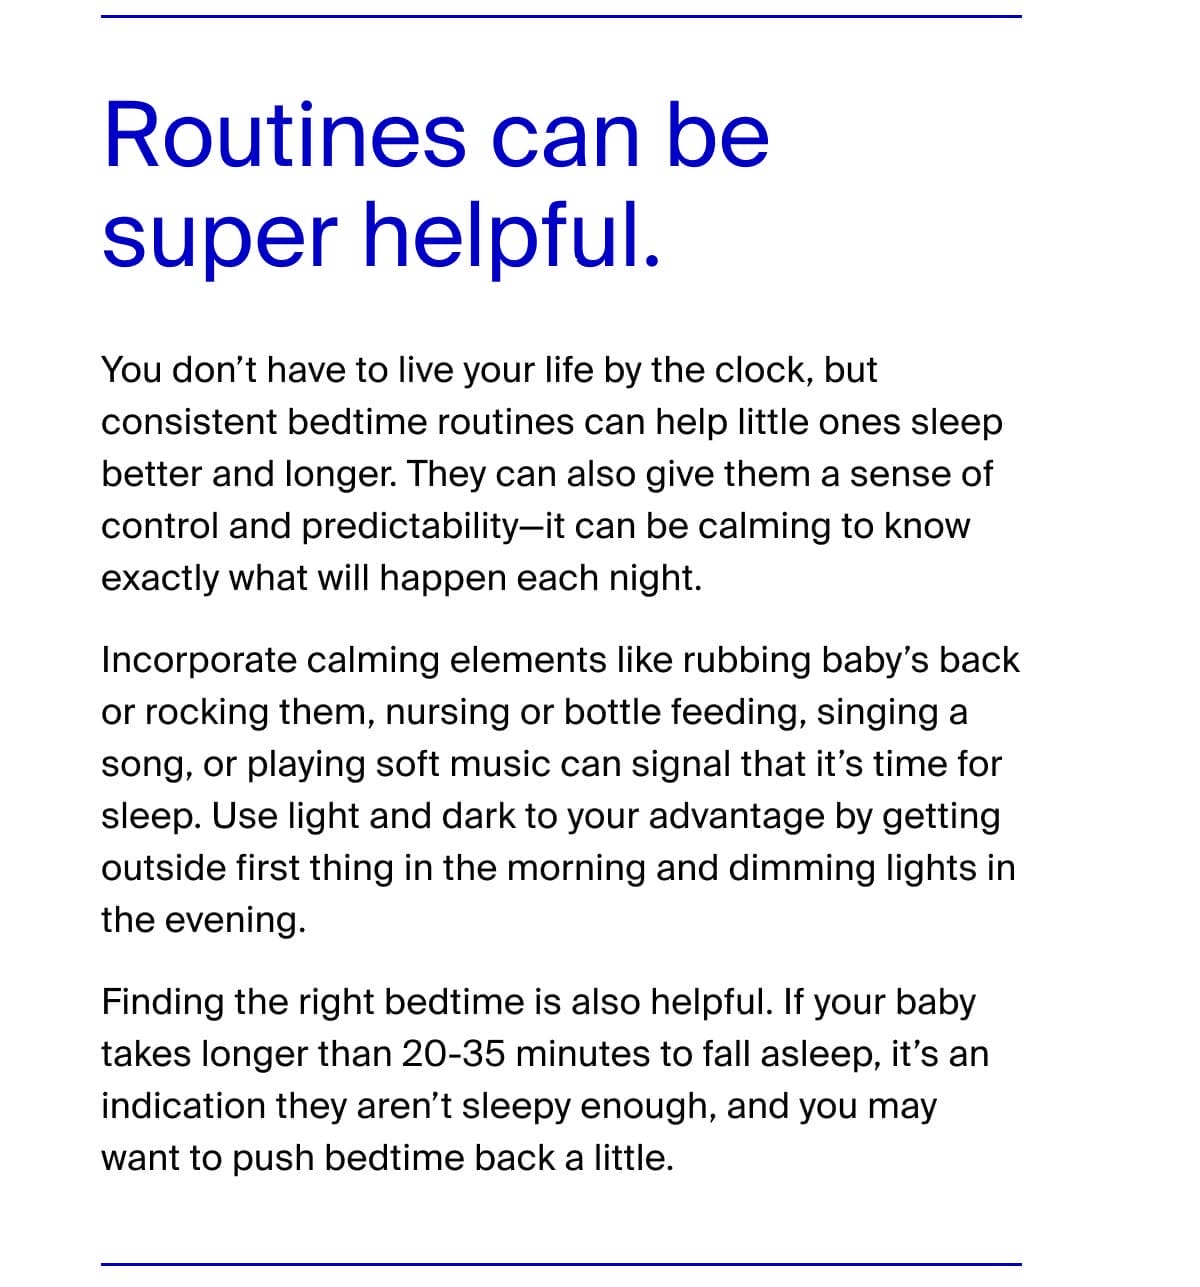 Routines can be super helpful.